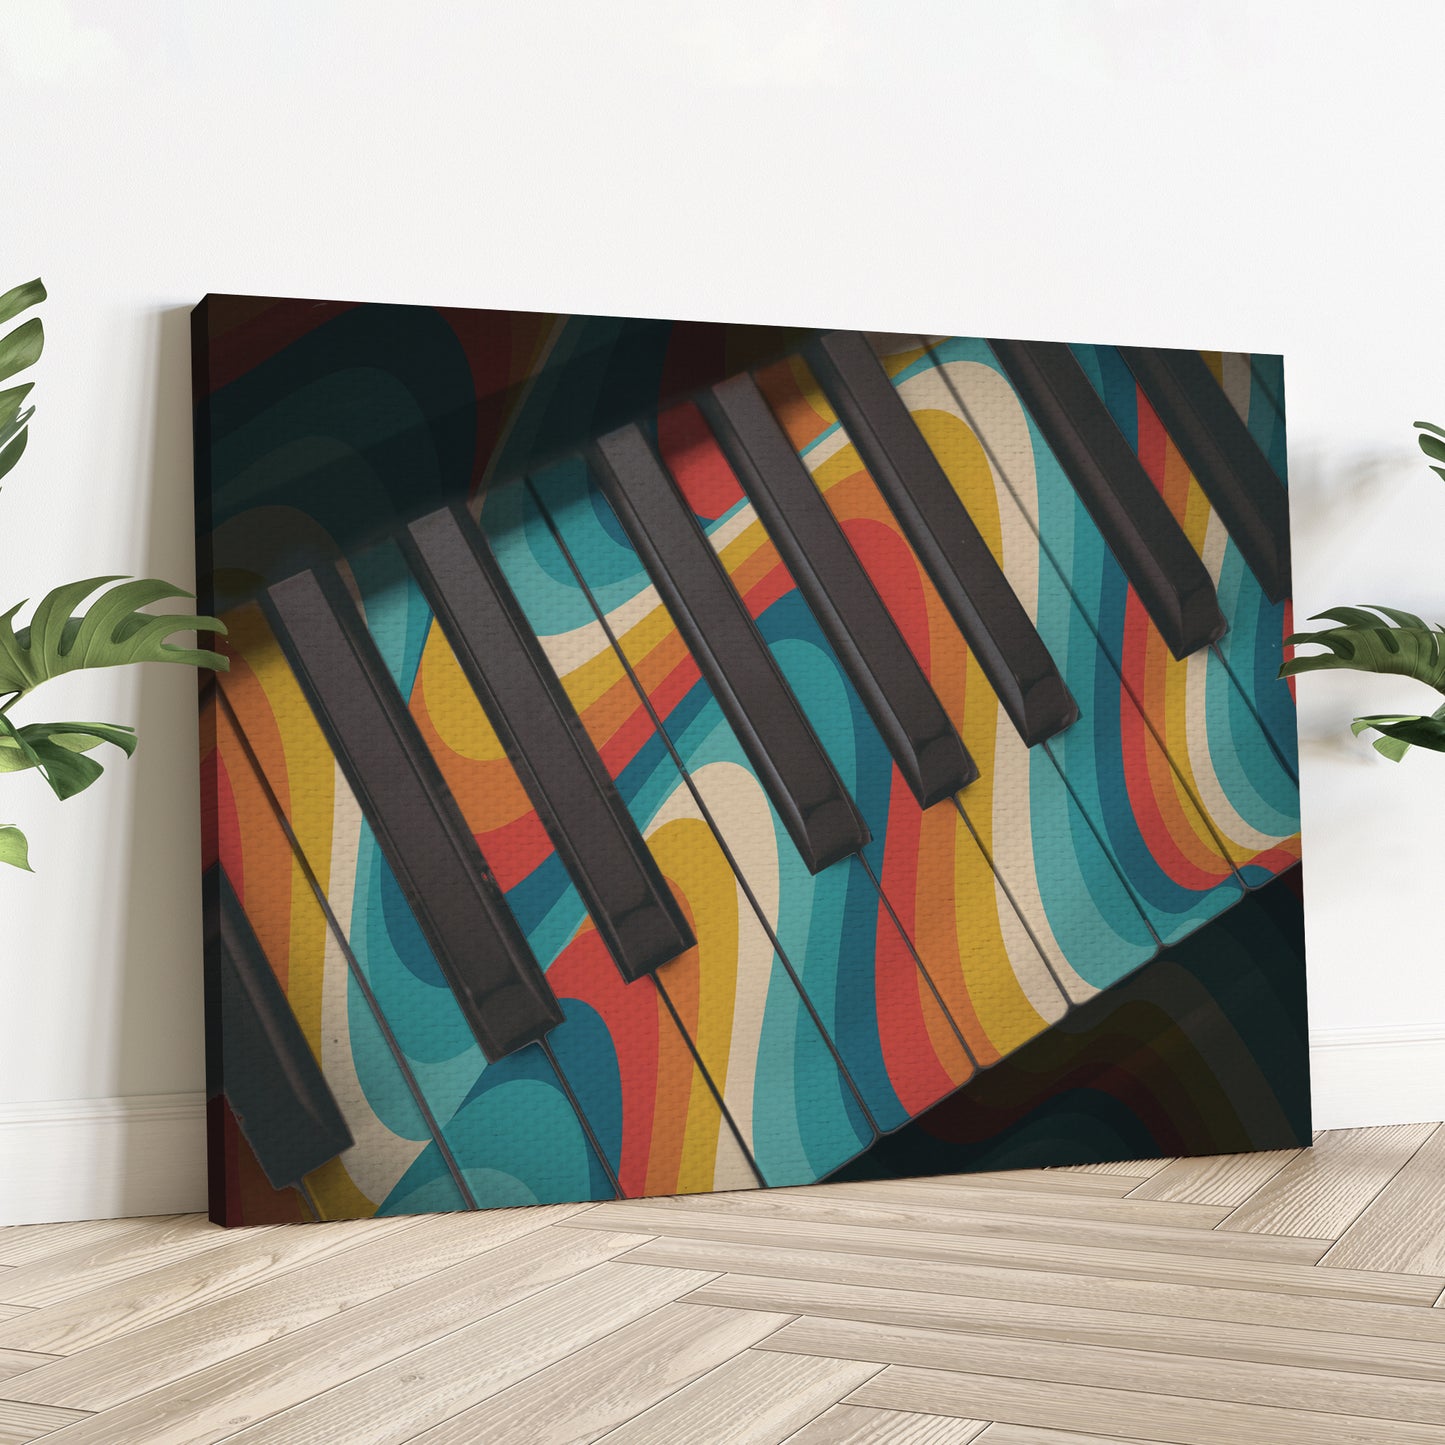 Piano Retro Canvas Wall Art - Image by Tailored Canvases